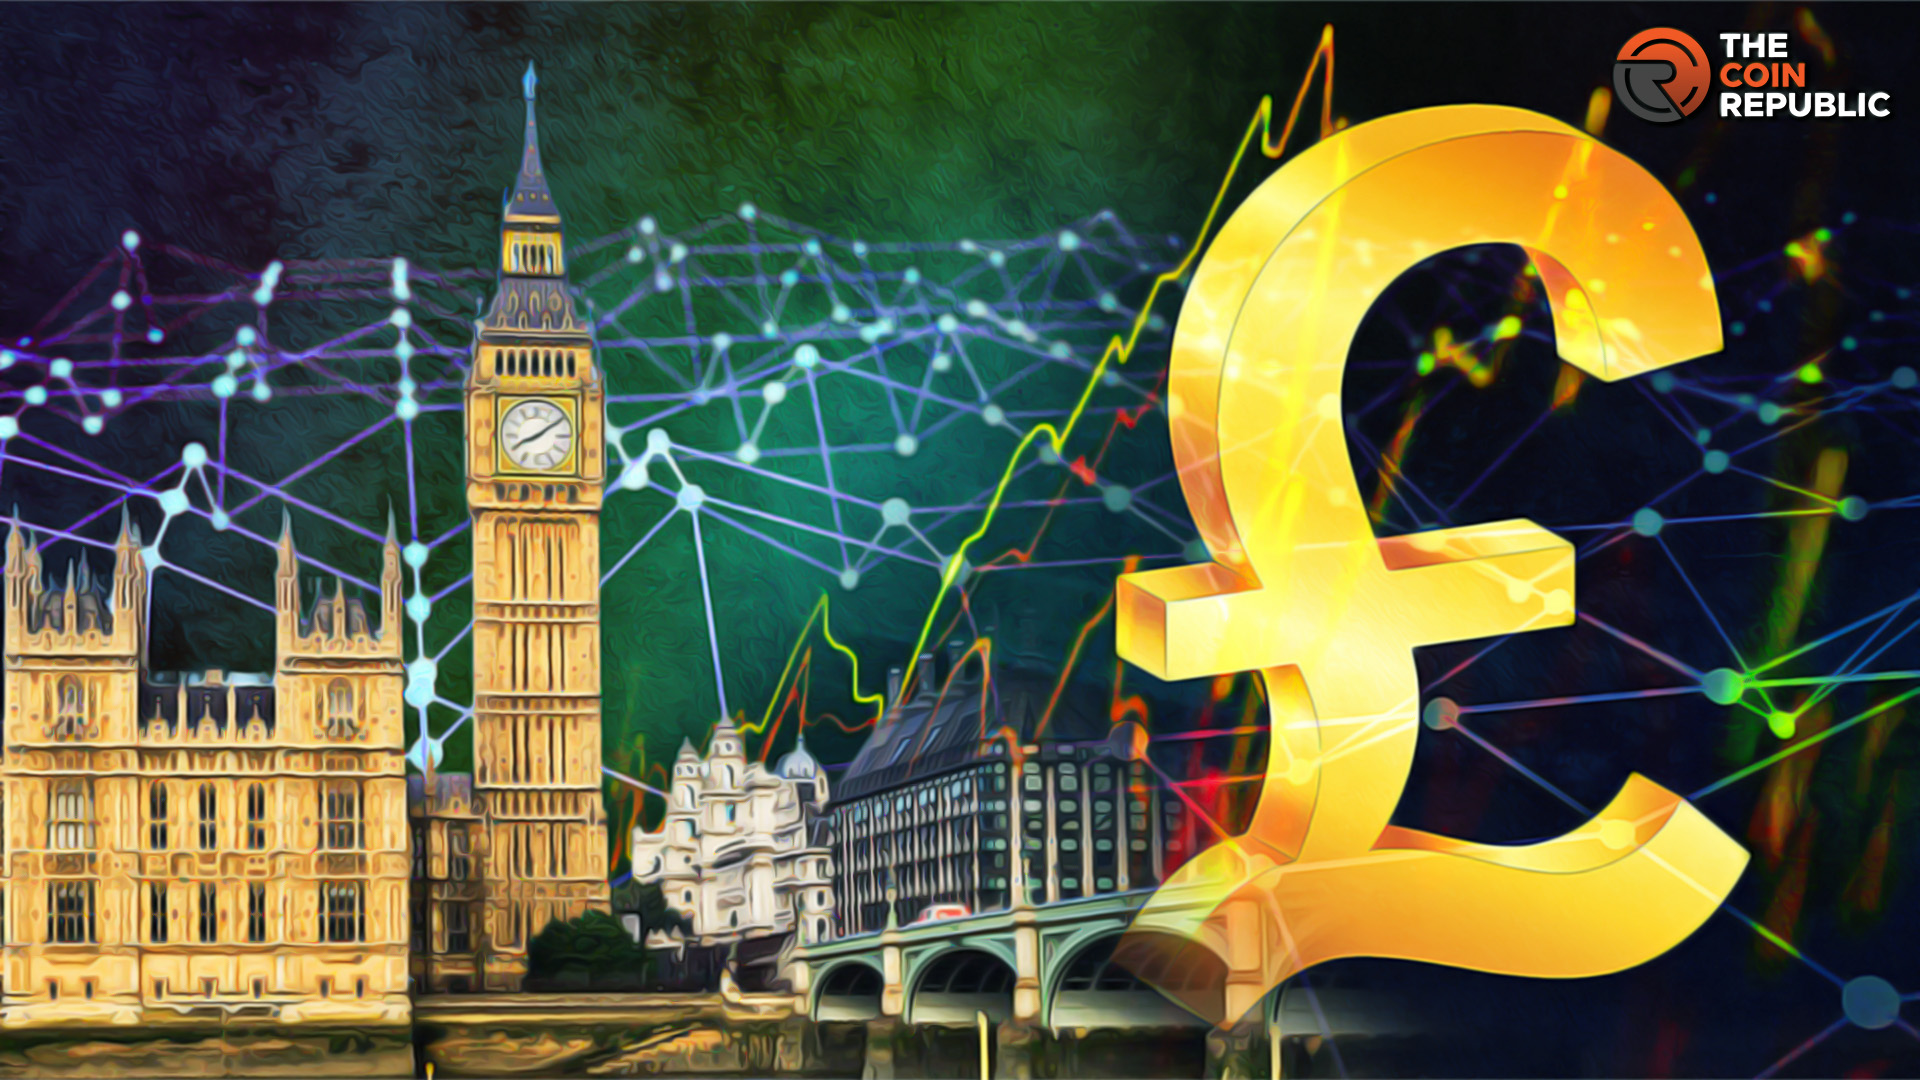 Lawmakers in the U.K. Urges Caution on Design of Digital Pound